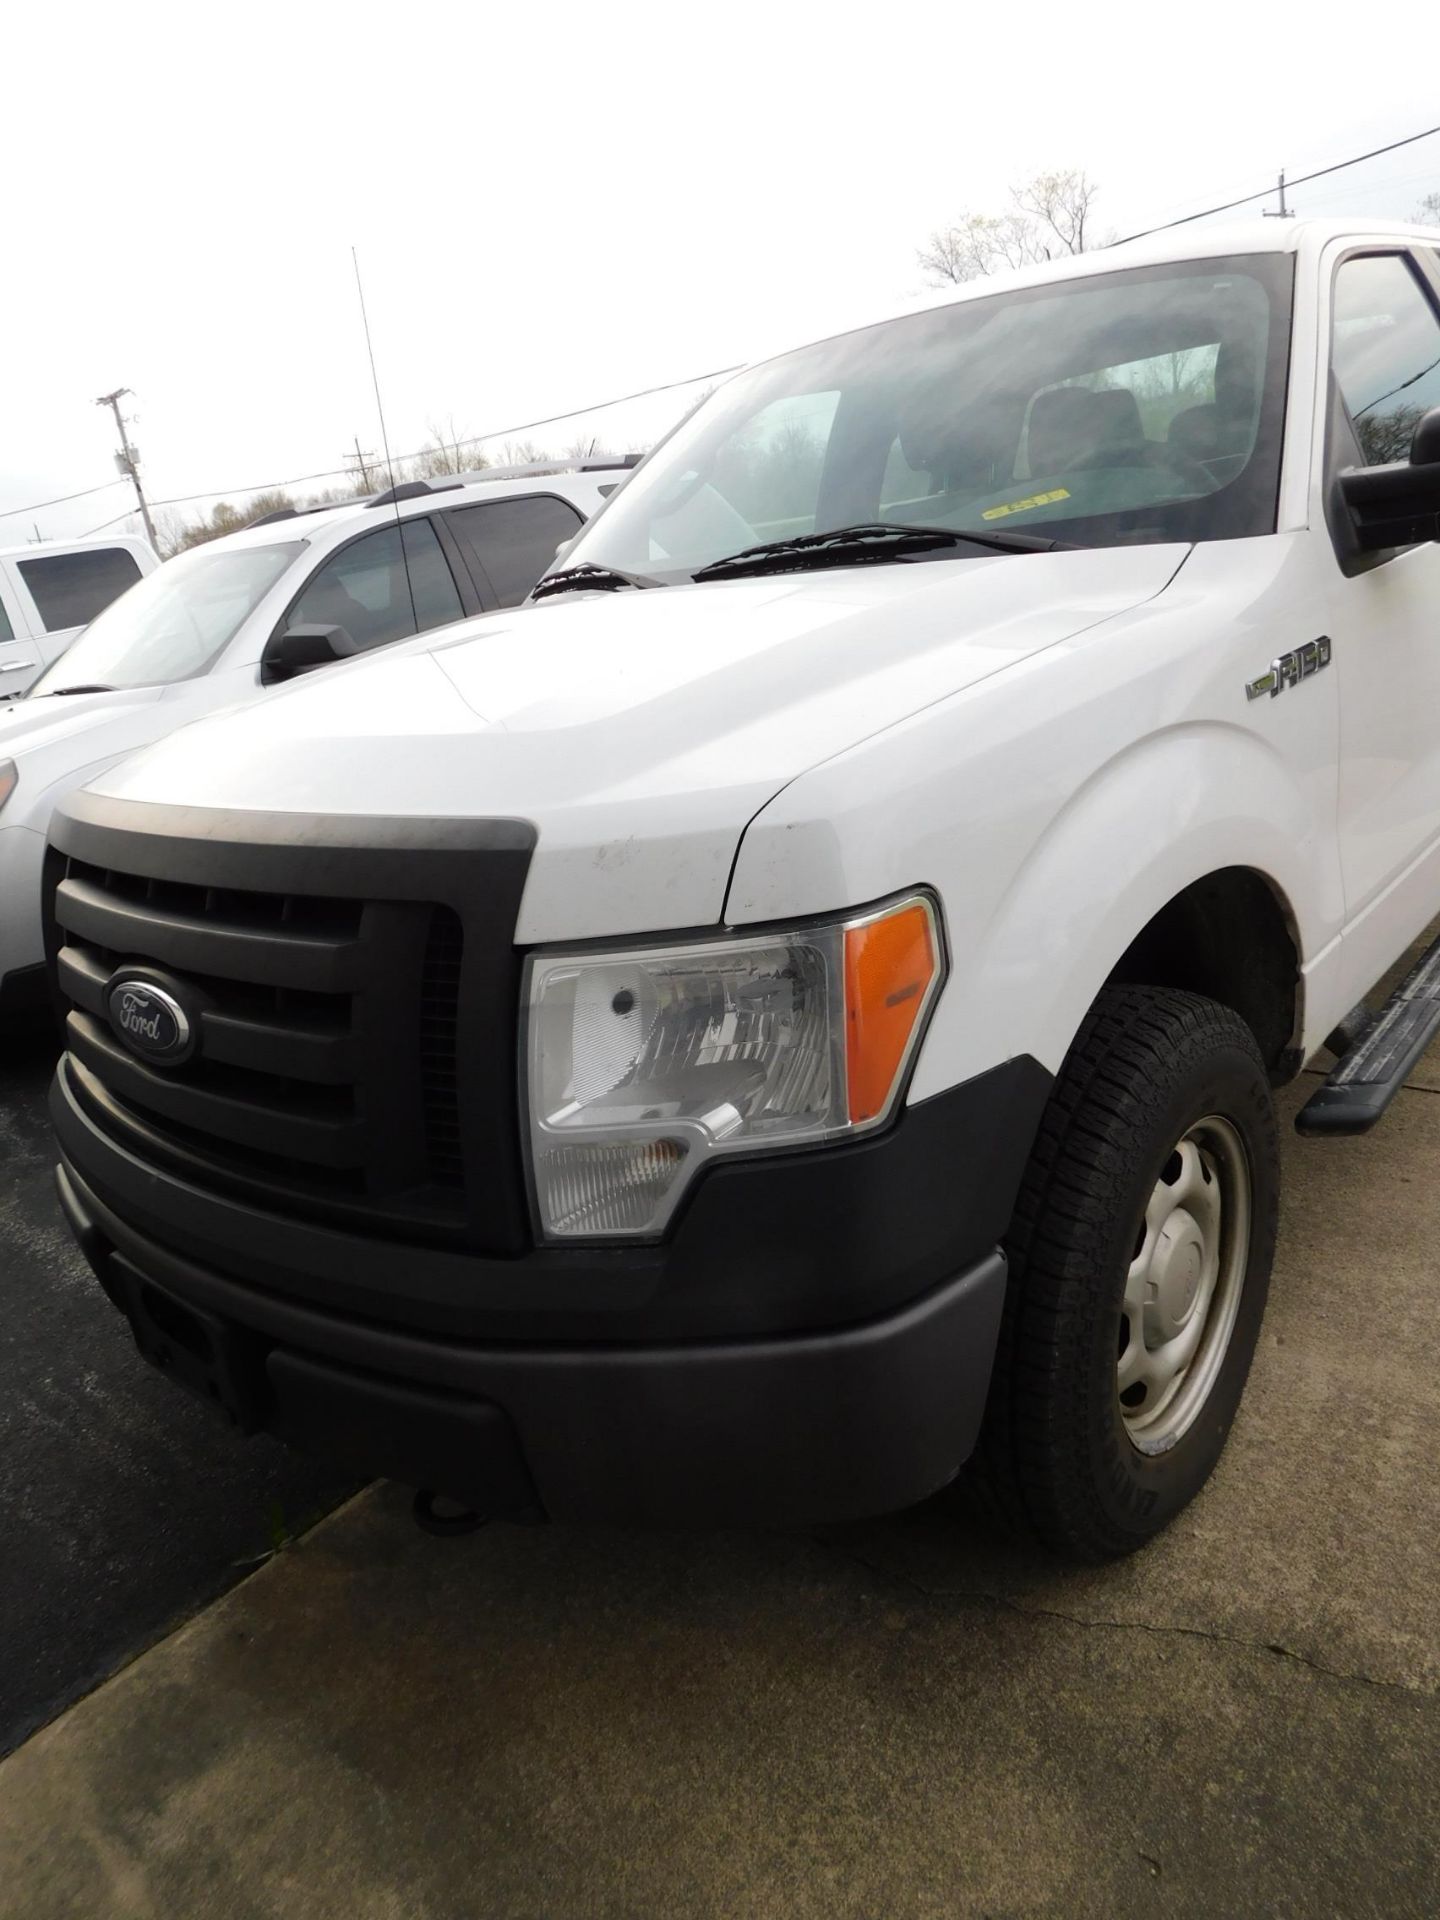 2012 Ford F-150XL Pickup VIN 1FTEX1EM1CFB57282, 4WD, Extended Cab, Automatic, AC< PW - Image 2 of 37